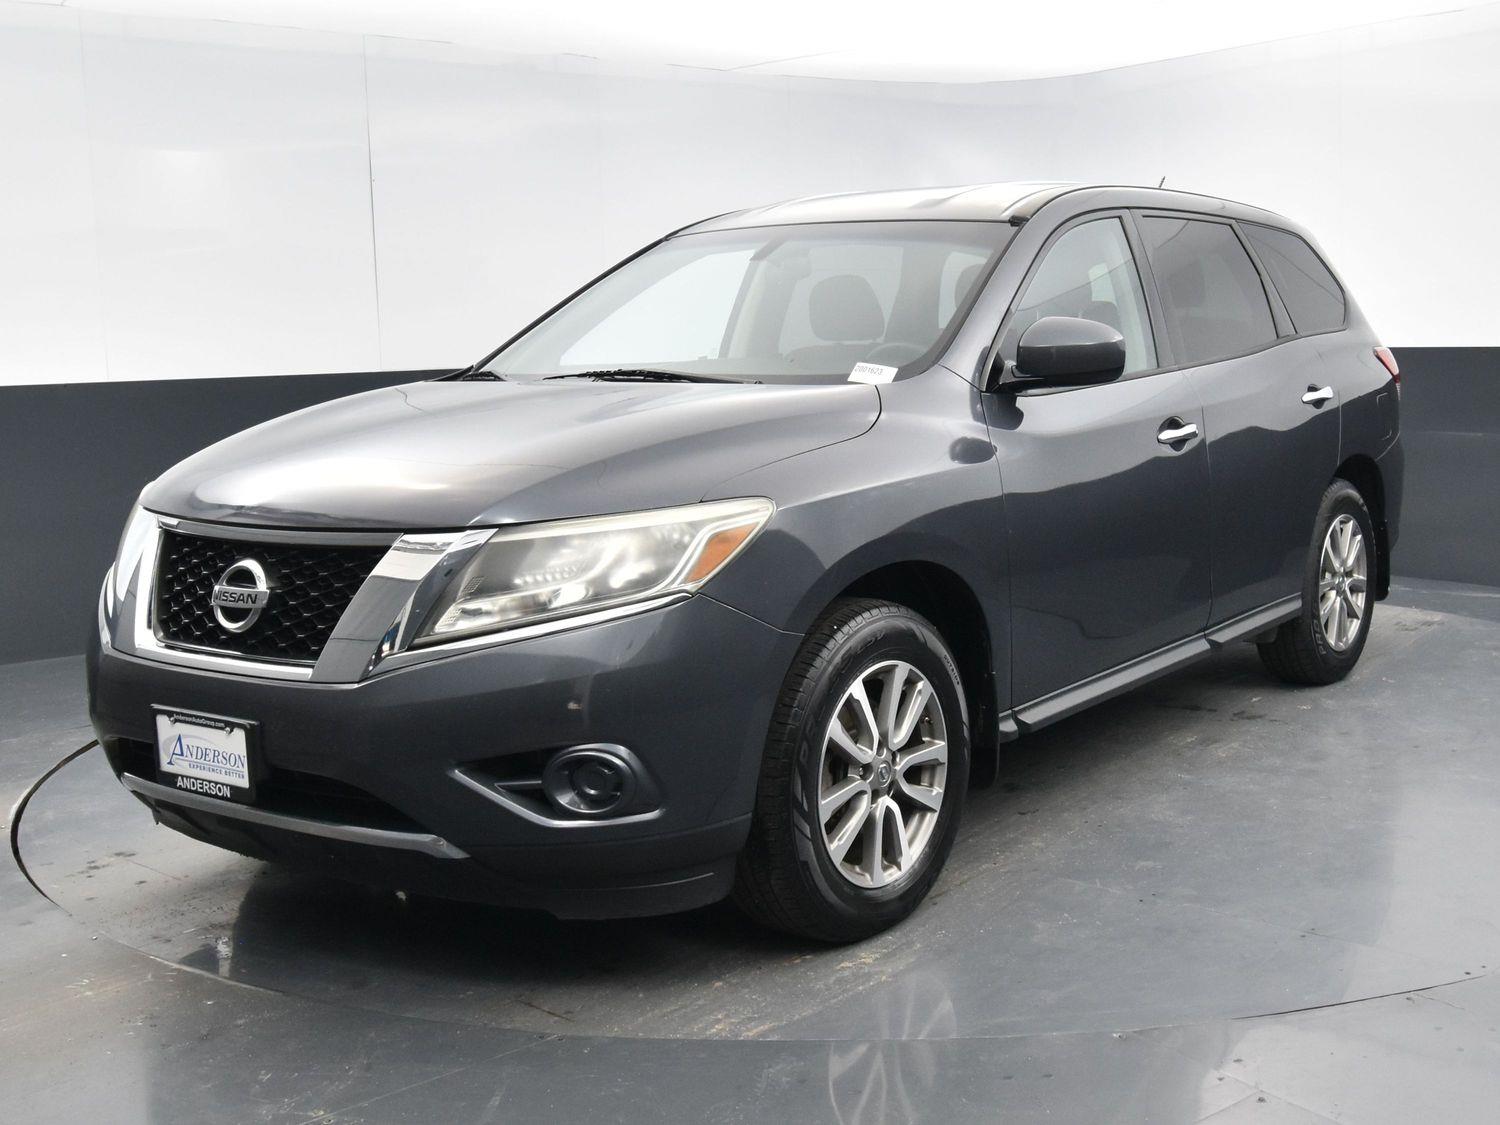 Used 2014 Nissan Pathfinder S Sport Utility for sale in Grand Island NE